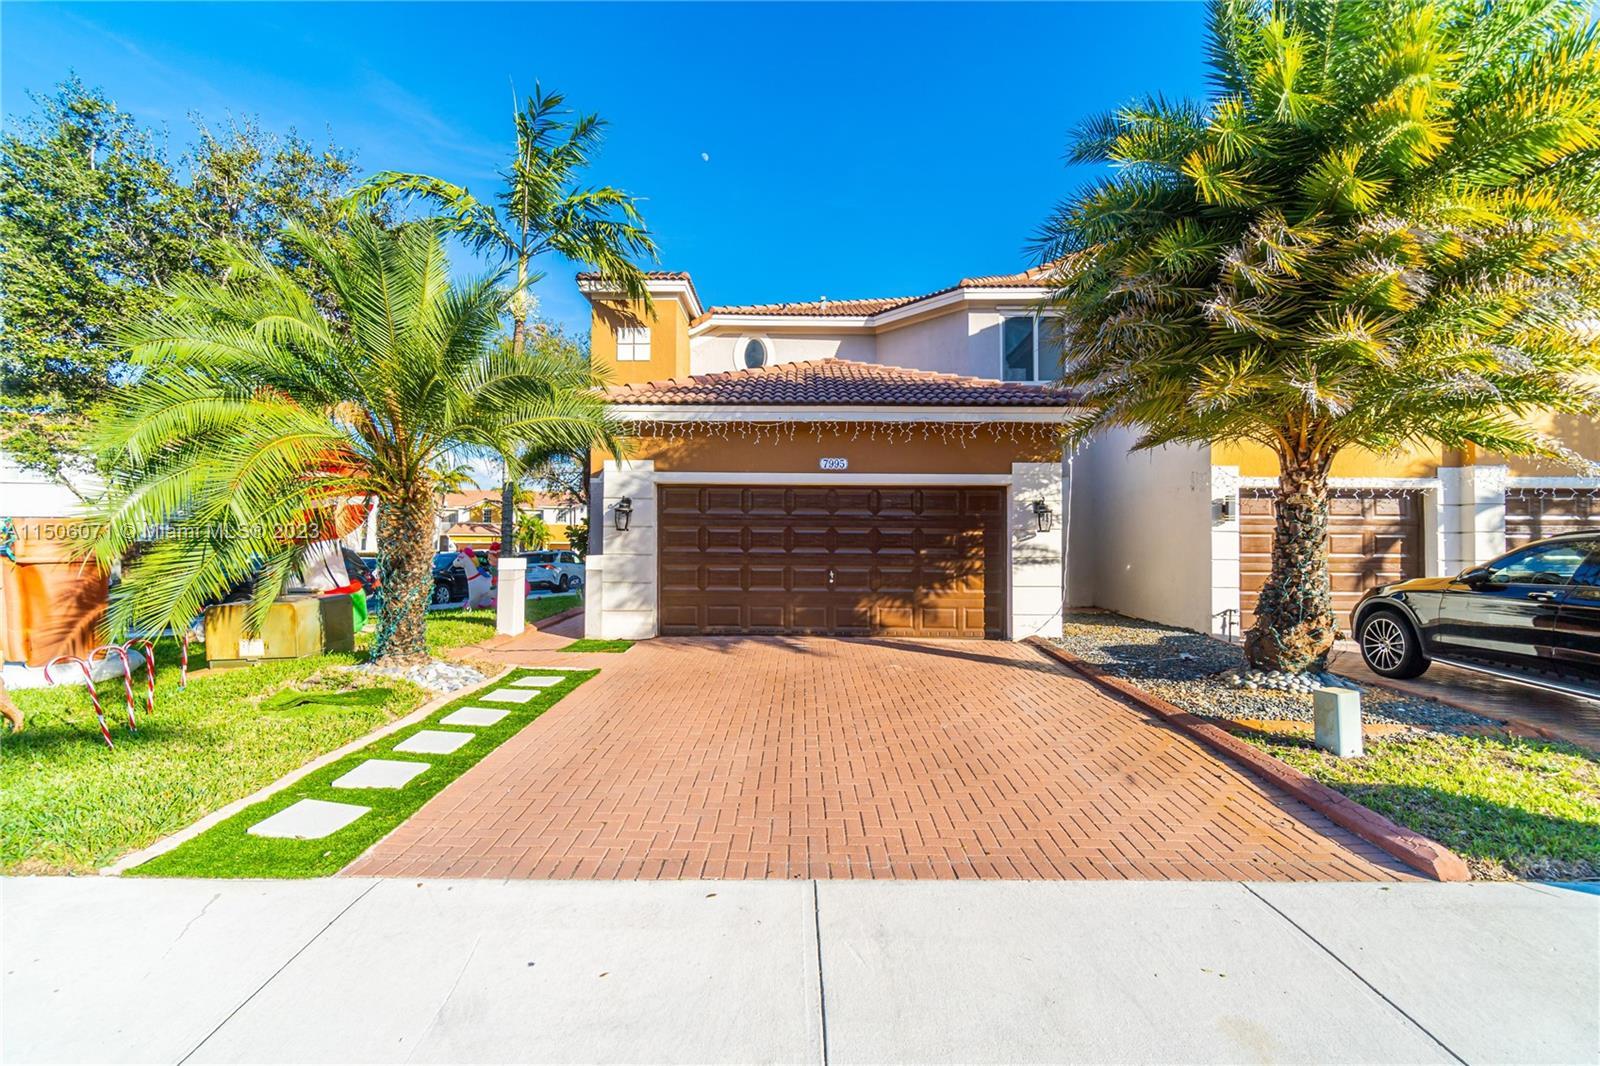 Photo of 7995 NW 114th Path in Doral, FL